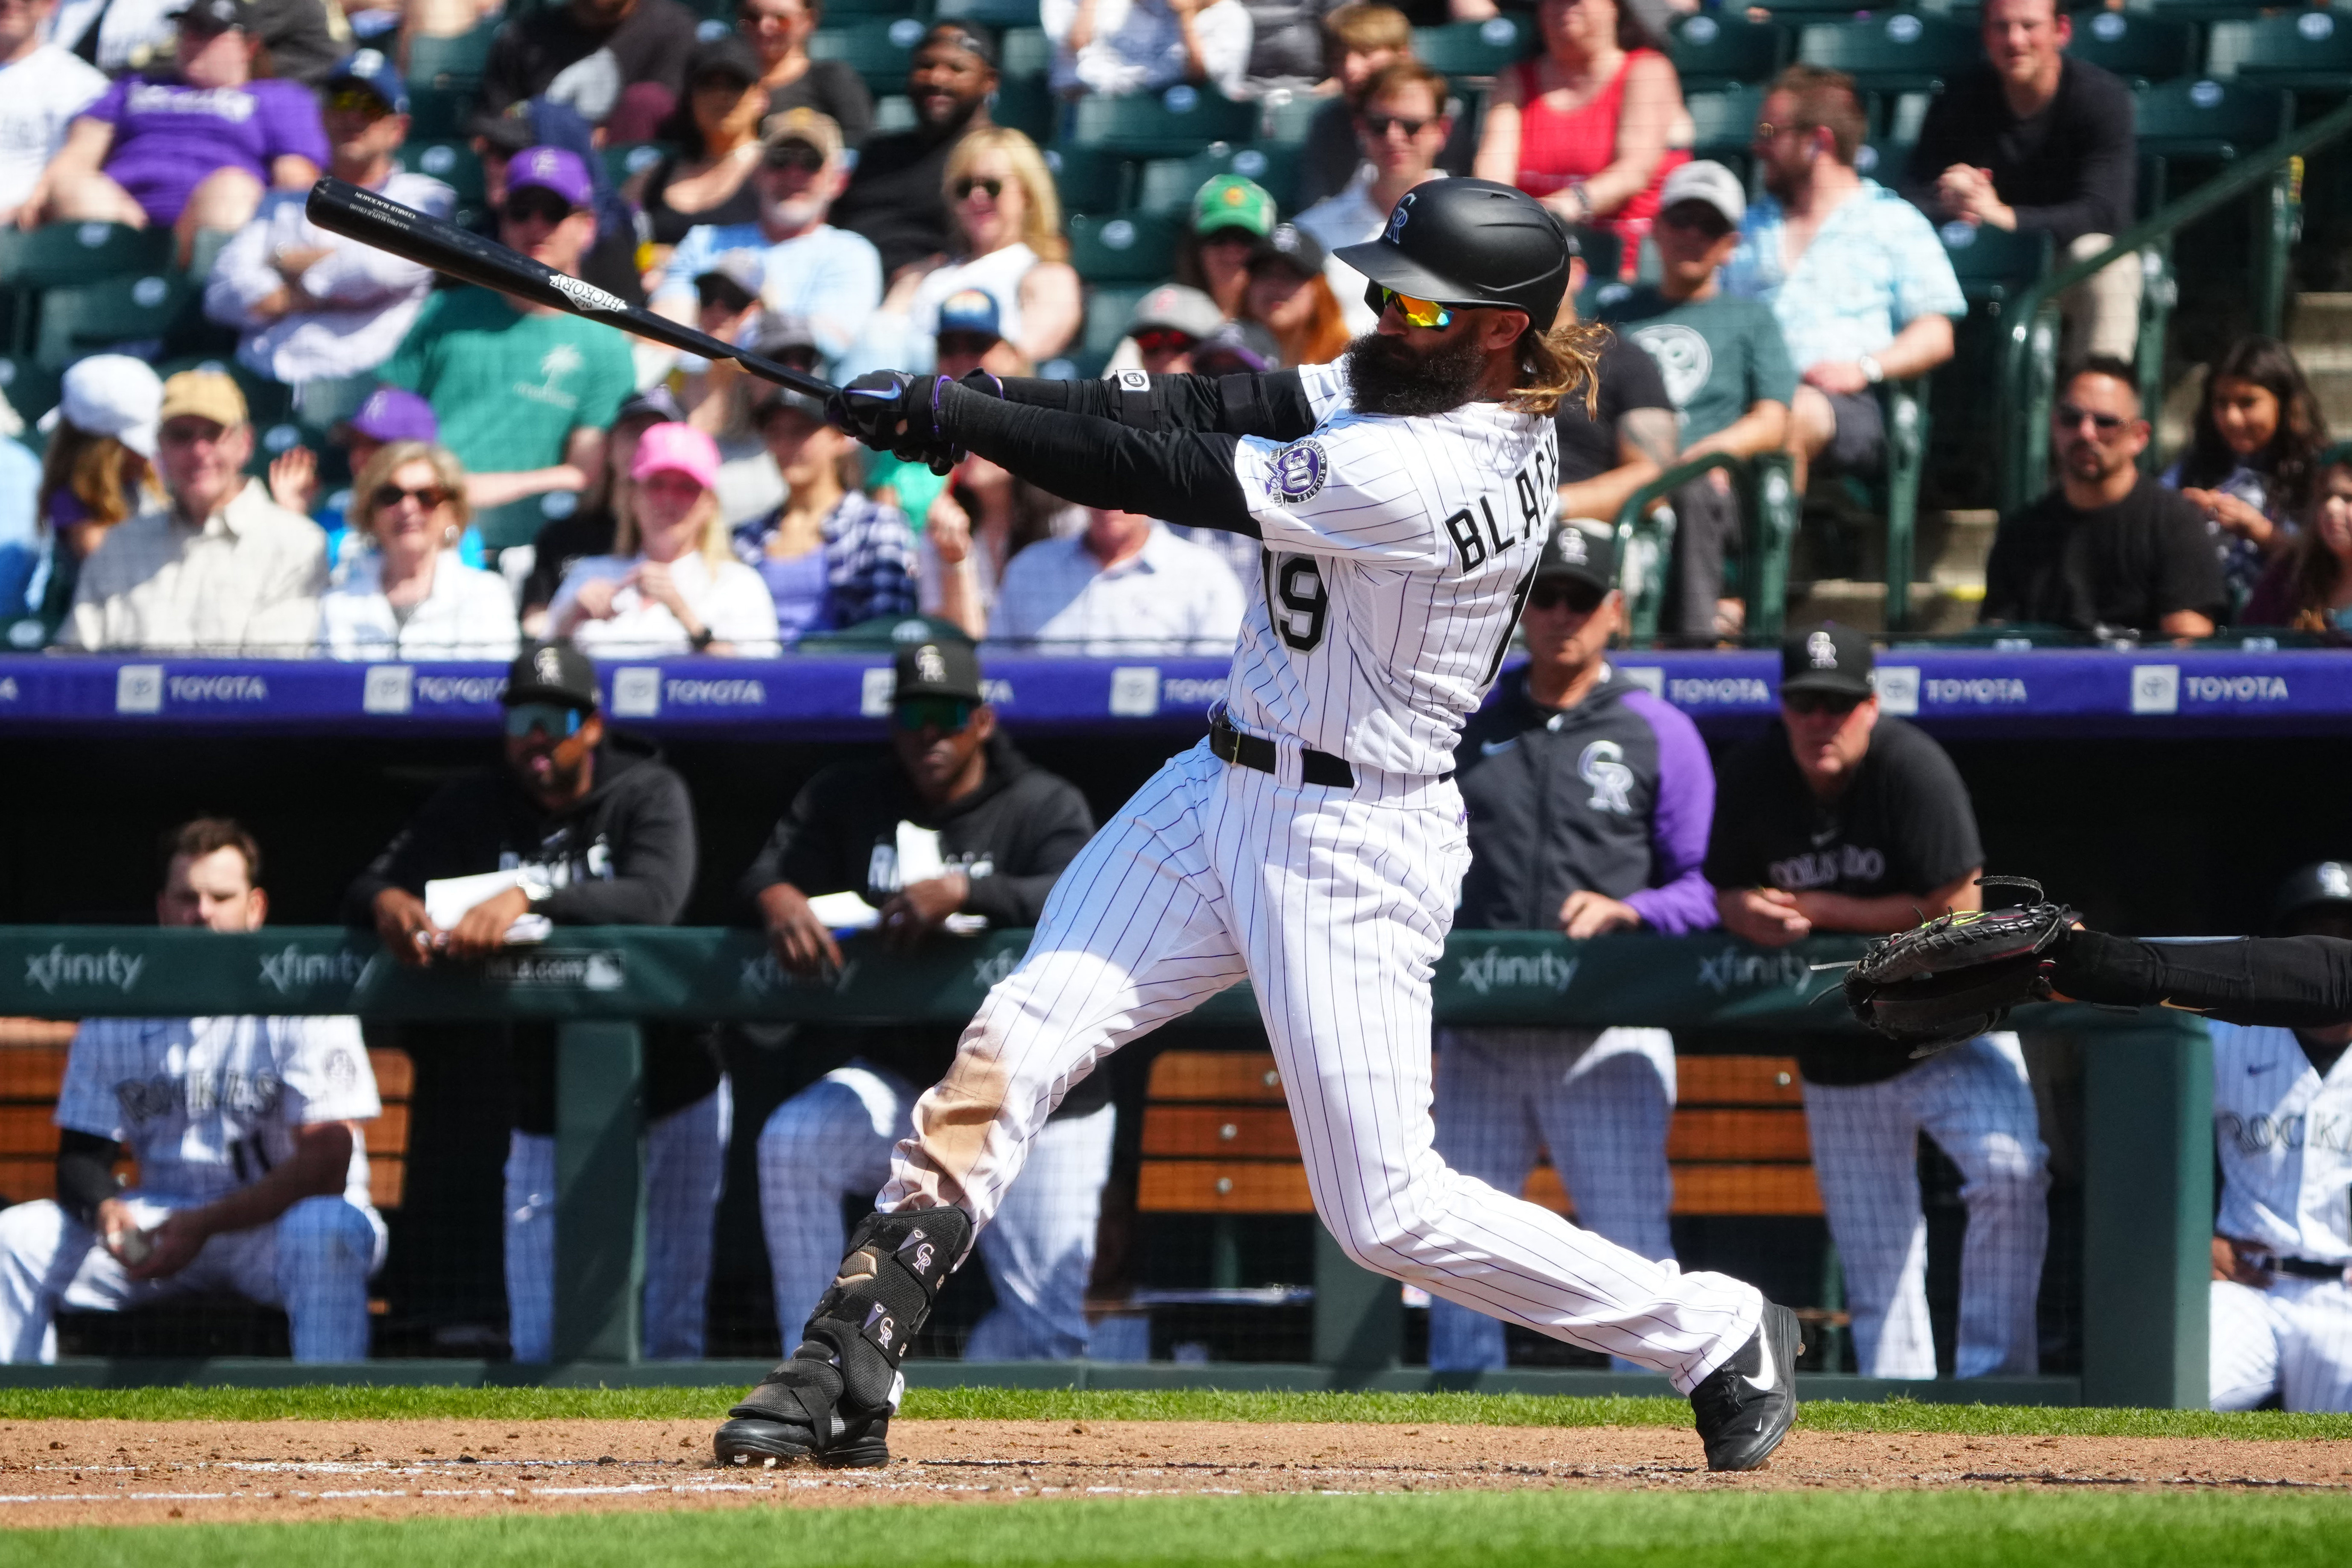 Rockies offense explodes in 12-4 win to avoid sweep